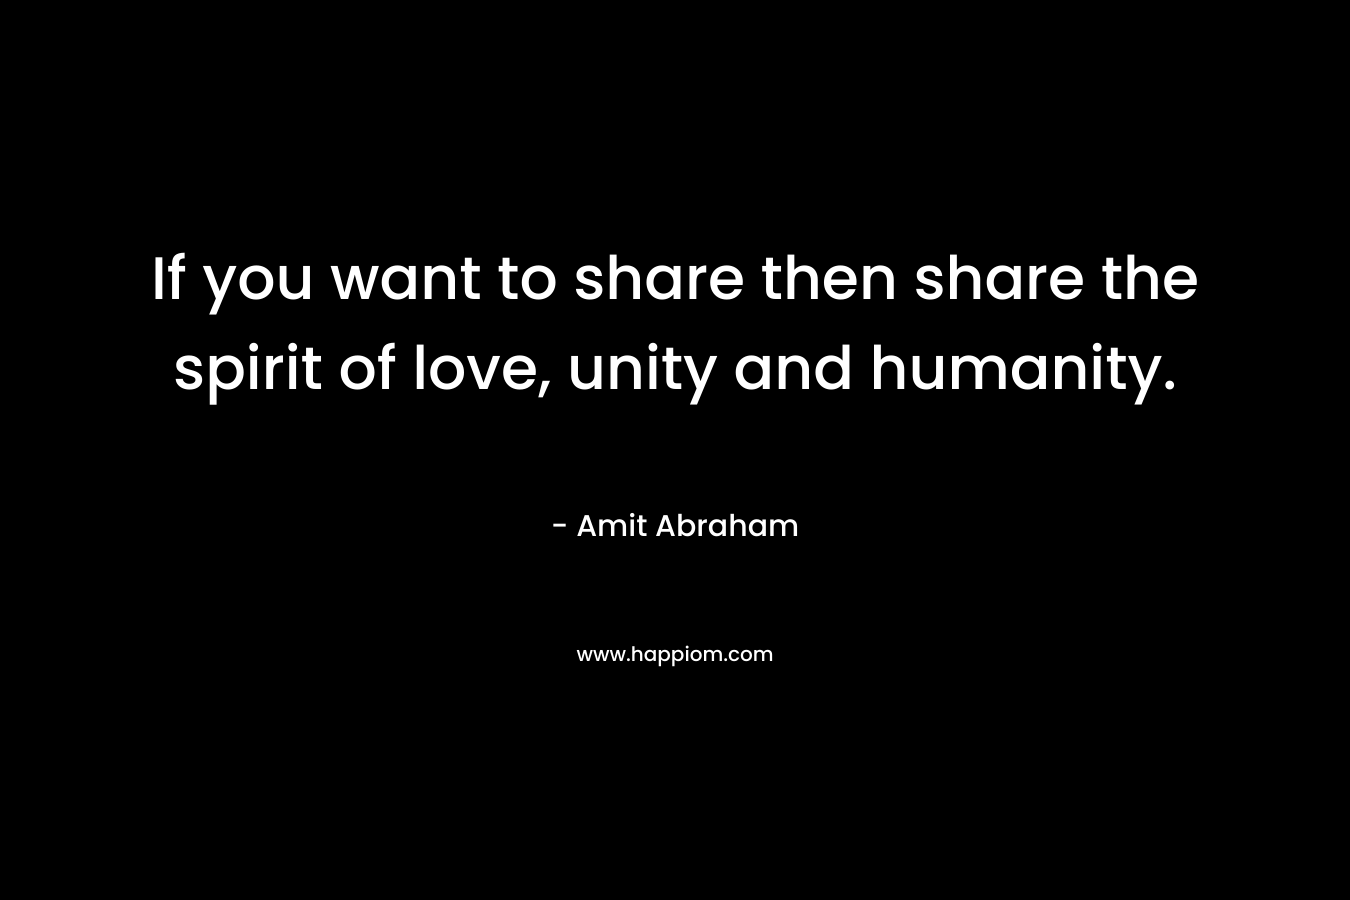 If you want to share then share the spirit of love, unity and humanity. – Amit Abraham